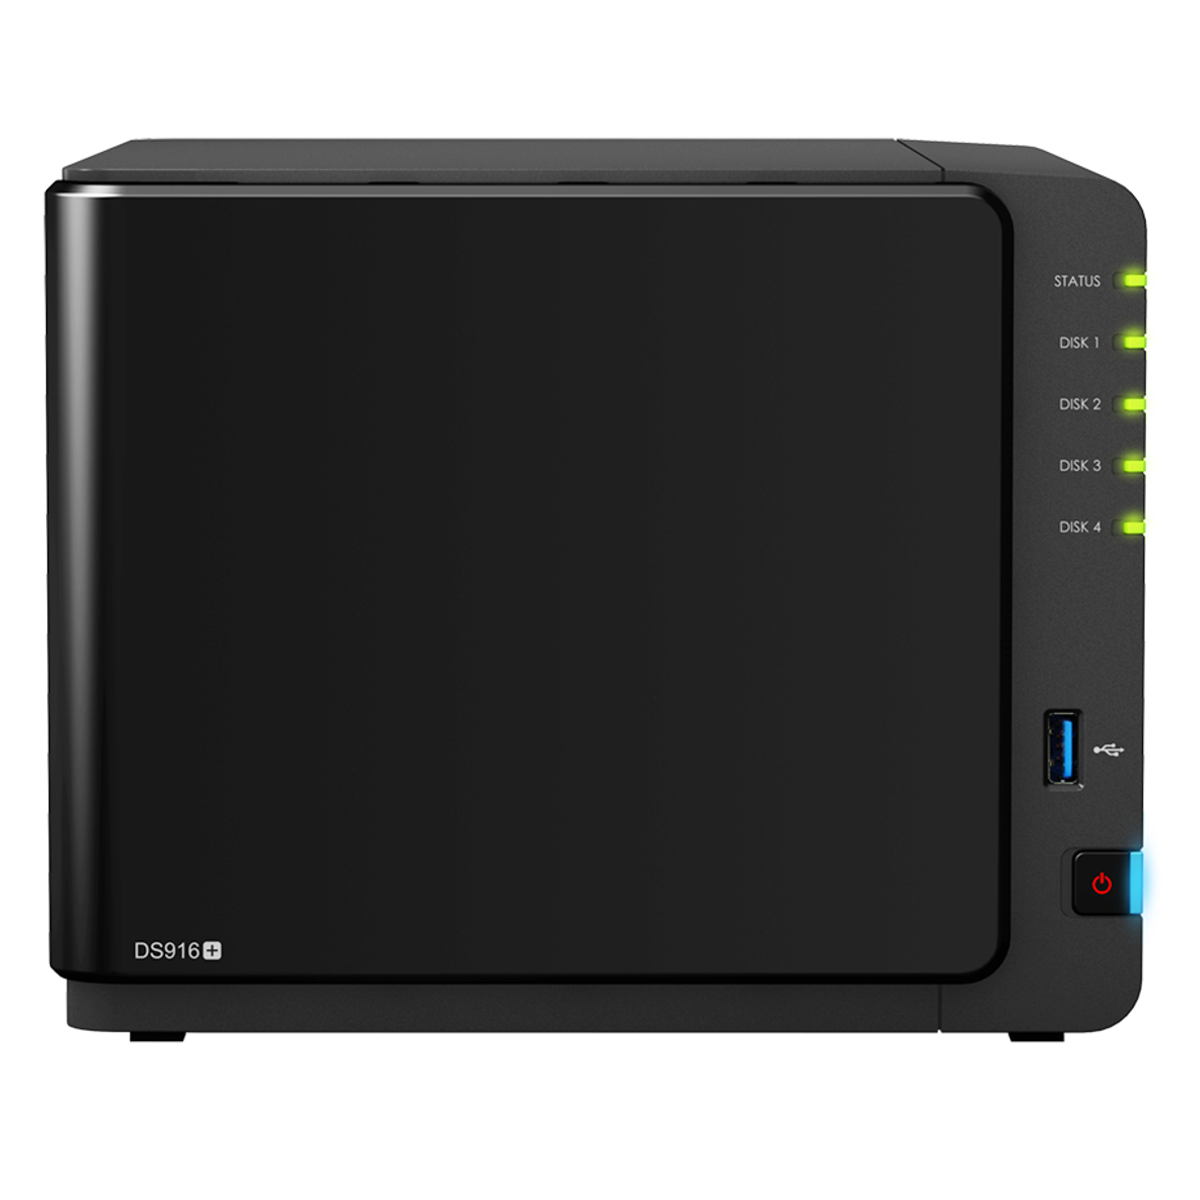 Synology - Synology DiskStation DS916 8GB 4 Bay Network Attached Storage Enclosure